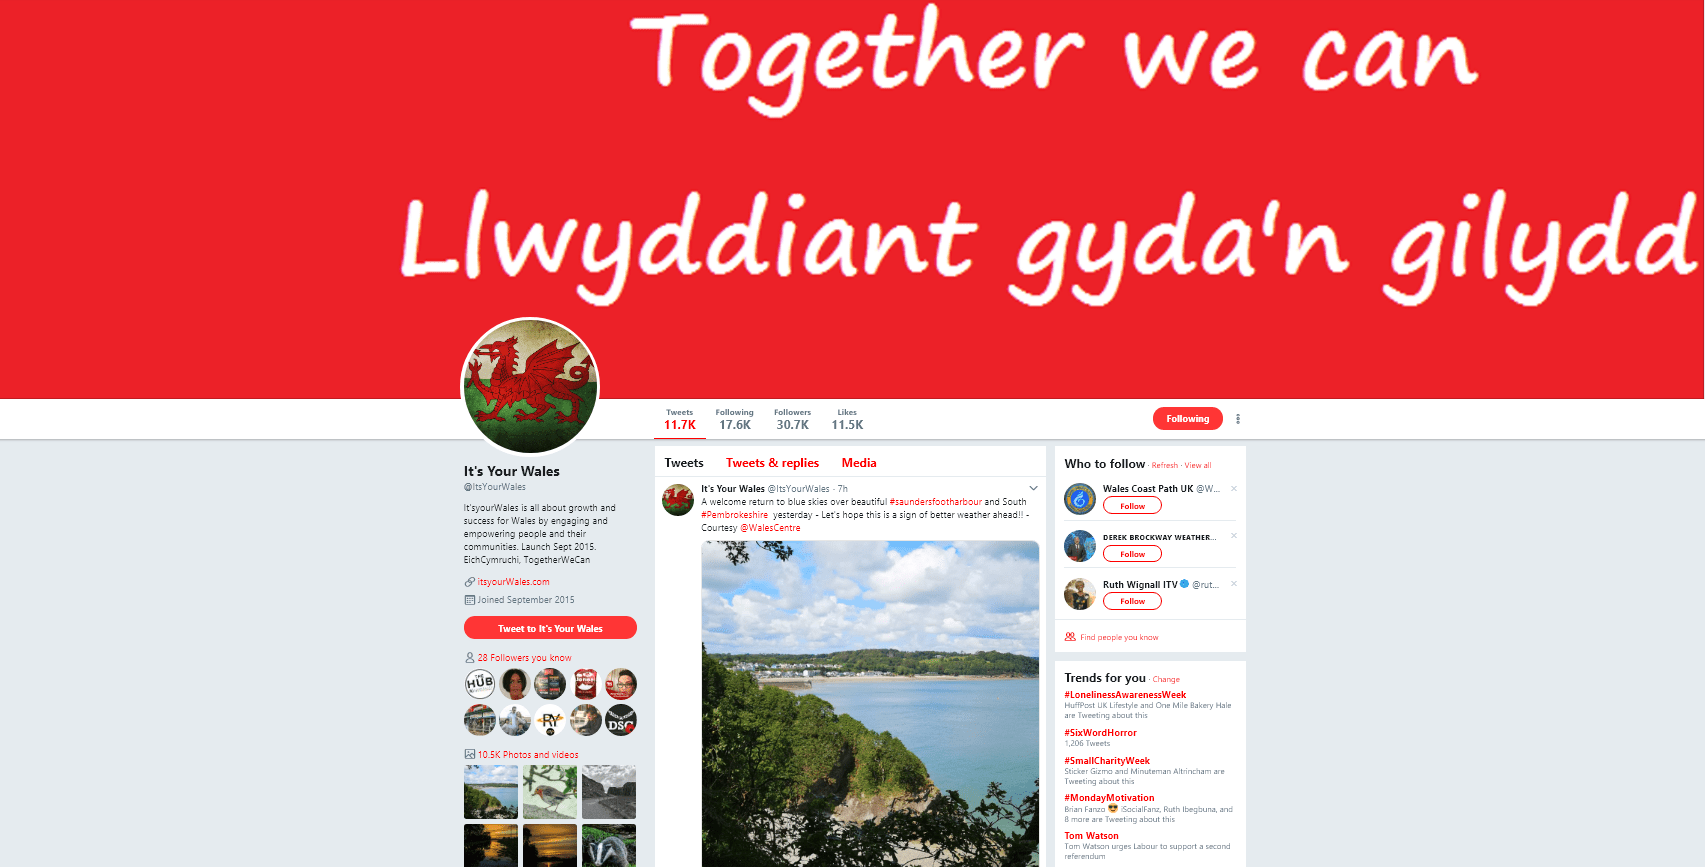 It's Your Wales Twitter Account